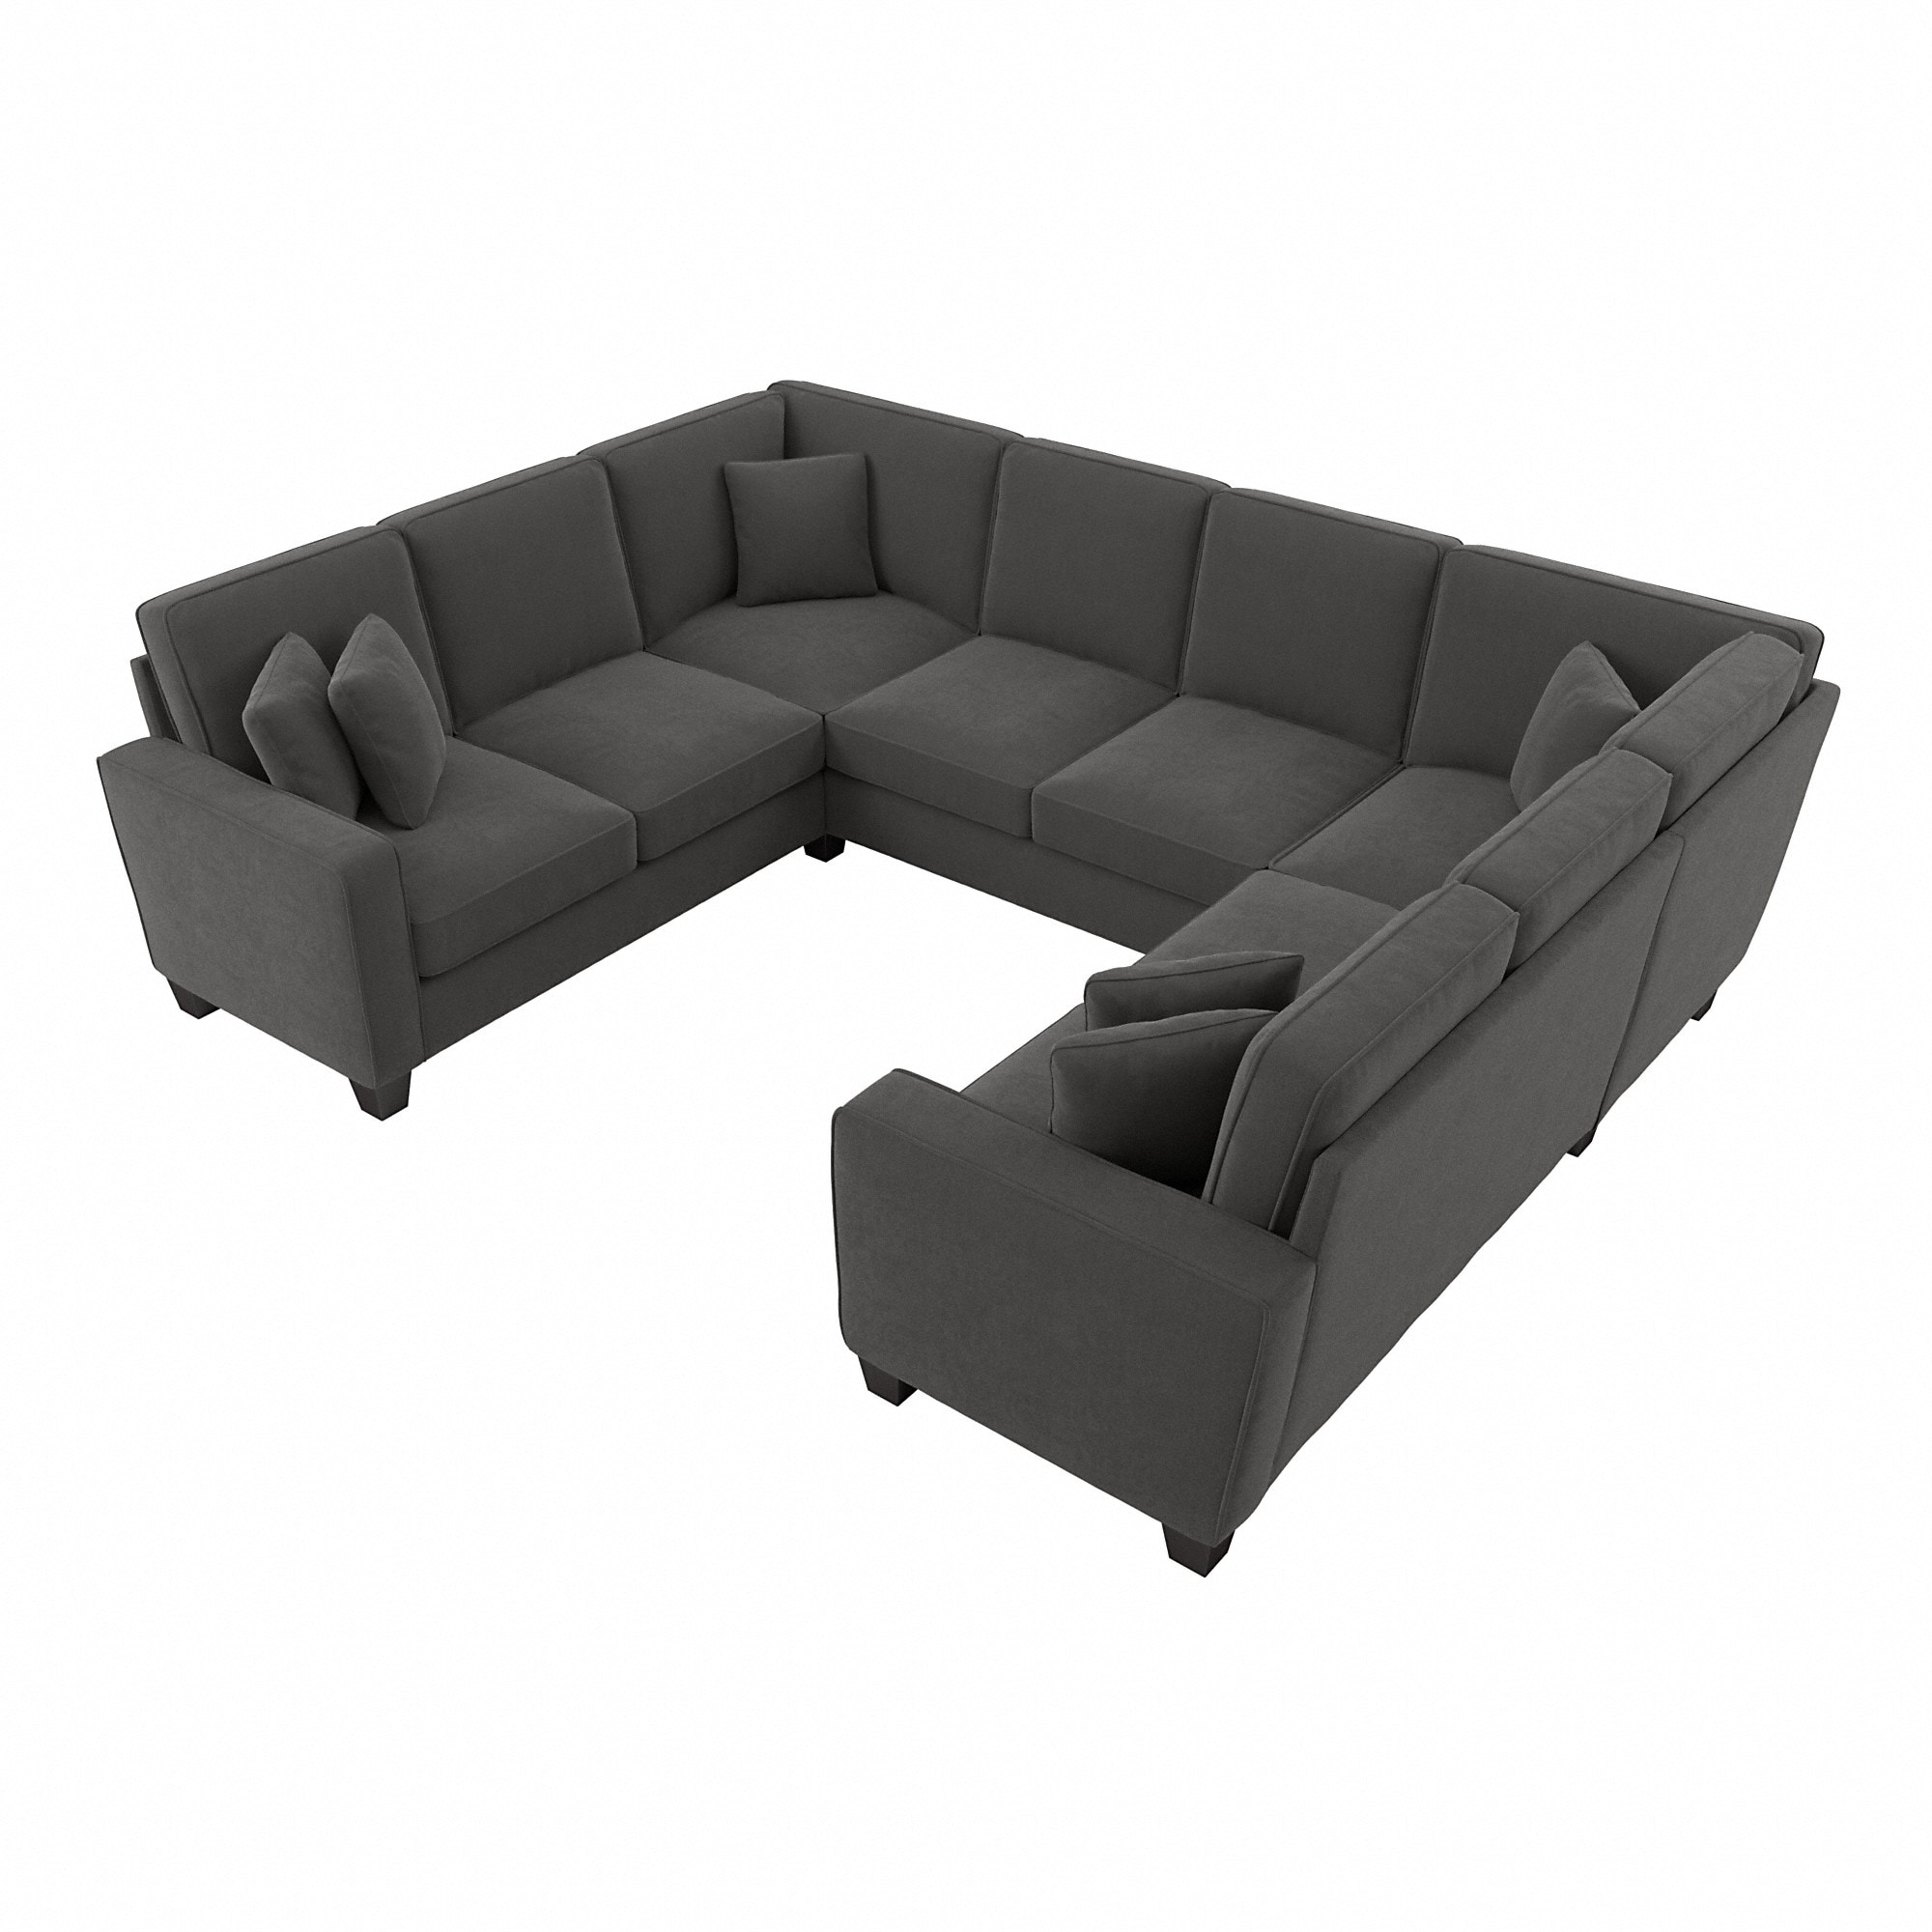 Caspian Upholstered Curved Arms Sectional Sofa White and Black – Midtown  Outlet Home Furnishings